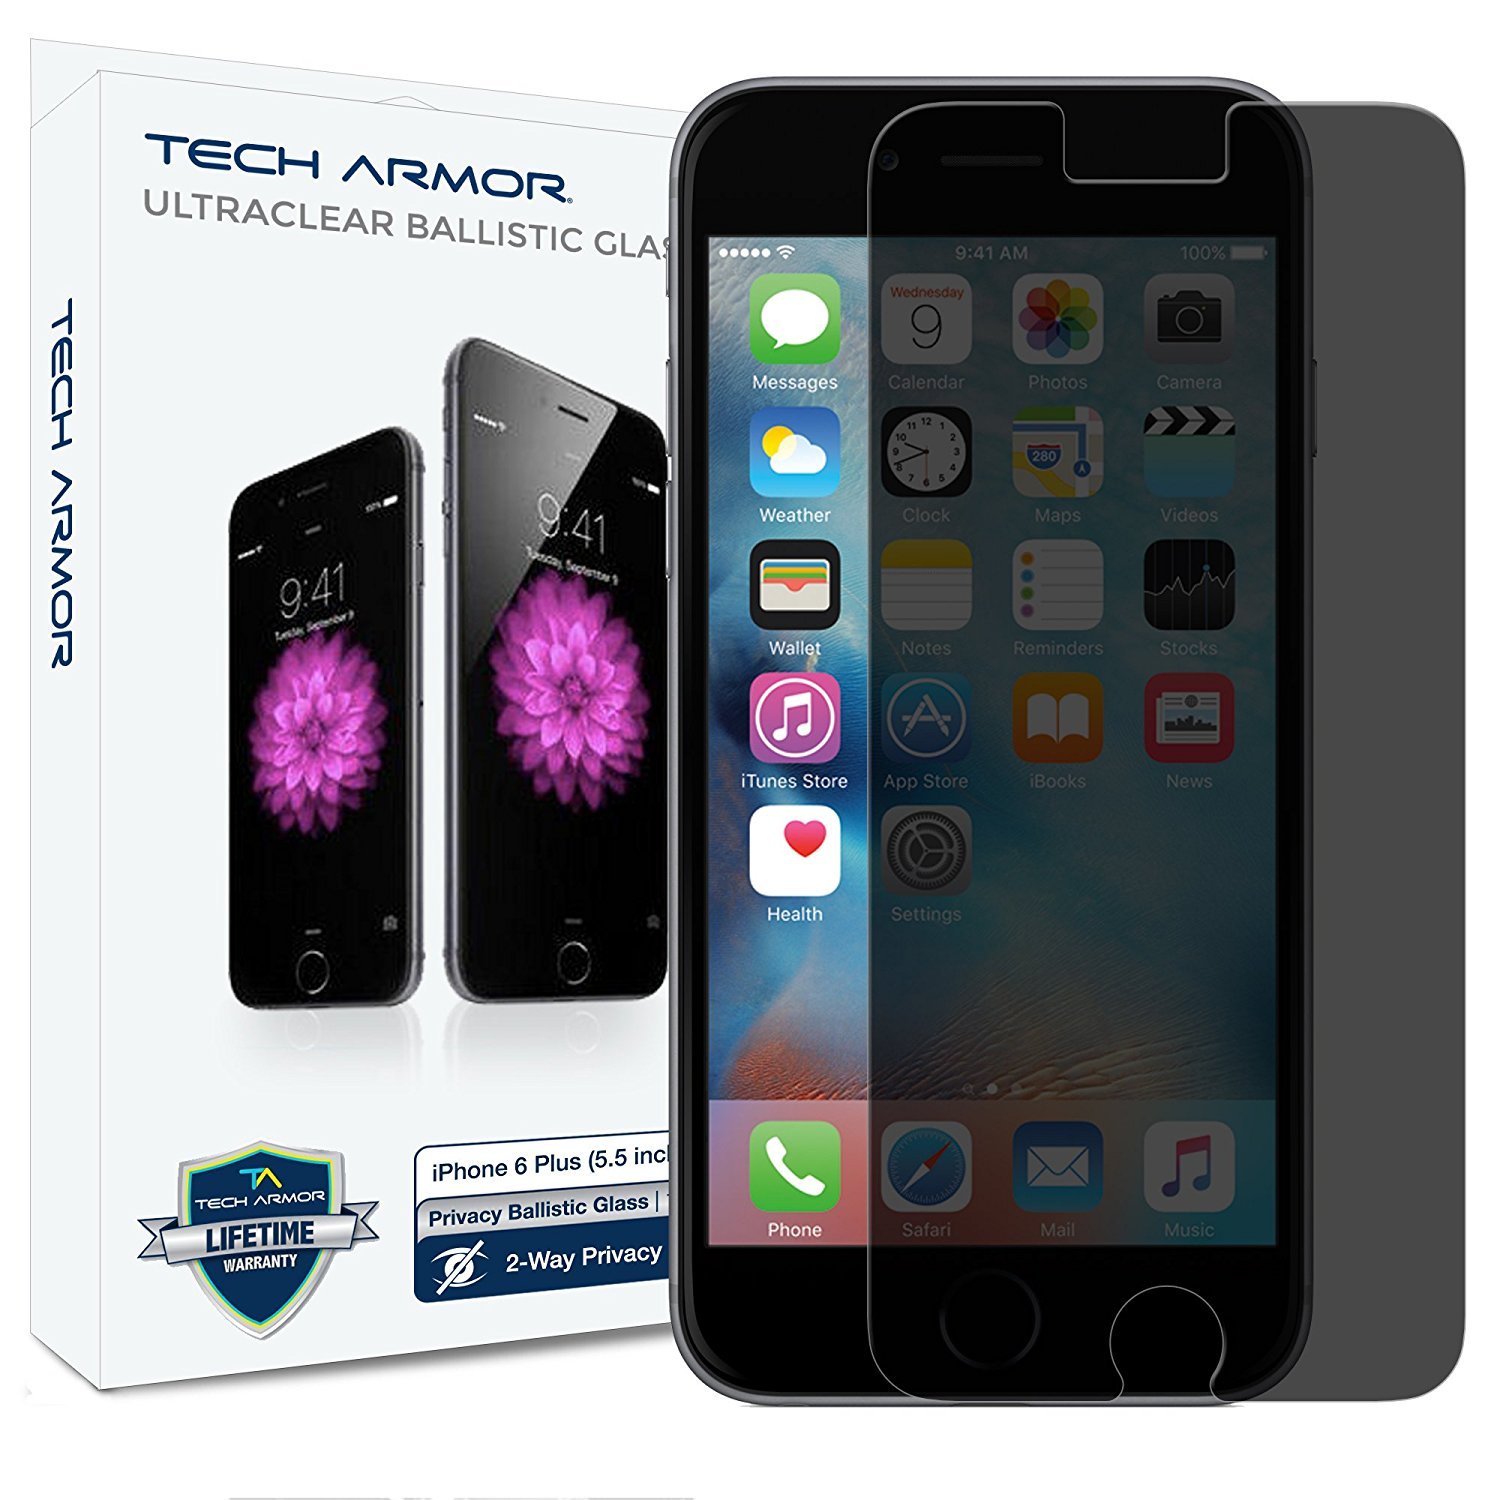 Tech Armor Privacy Ballistic Glass Screen Protector Designed for Apple iPhone 6 Plus and iPhone 6s Plus 5.5 Inch 1 Pack Tempered Glass - image 1 of 3